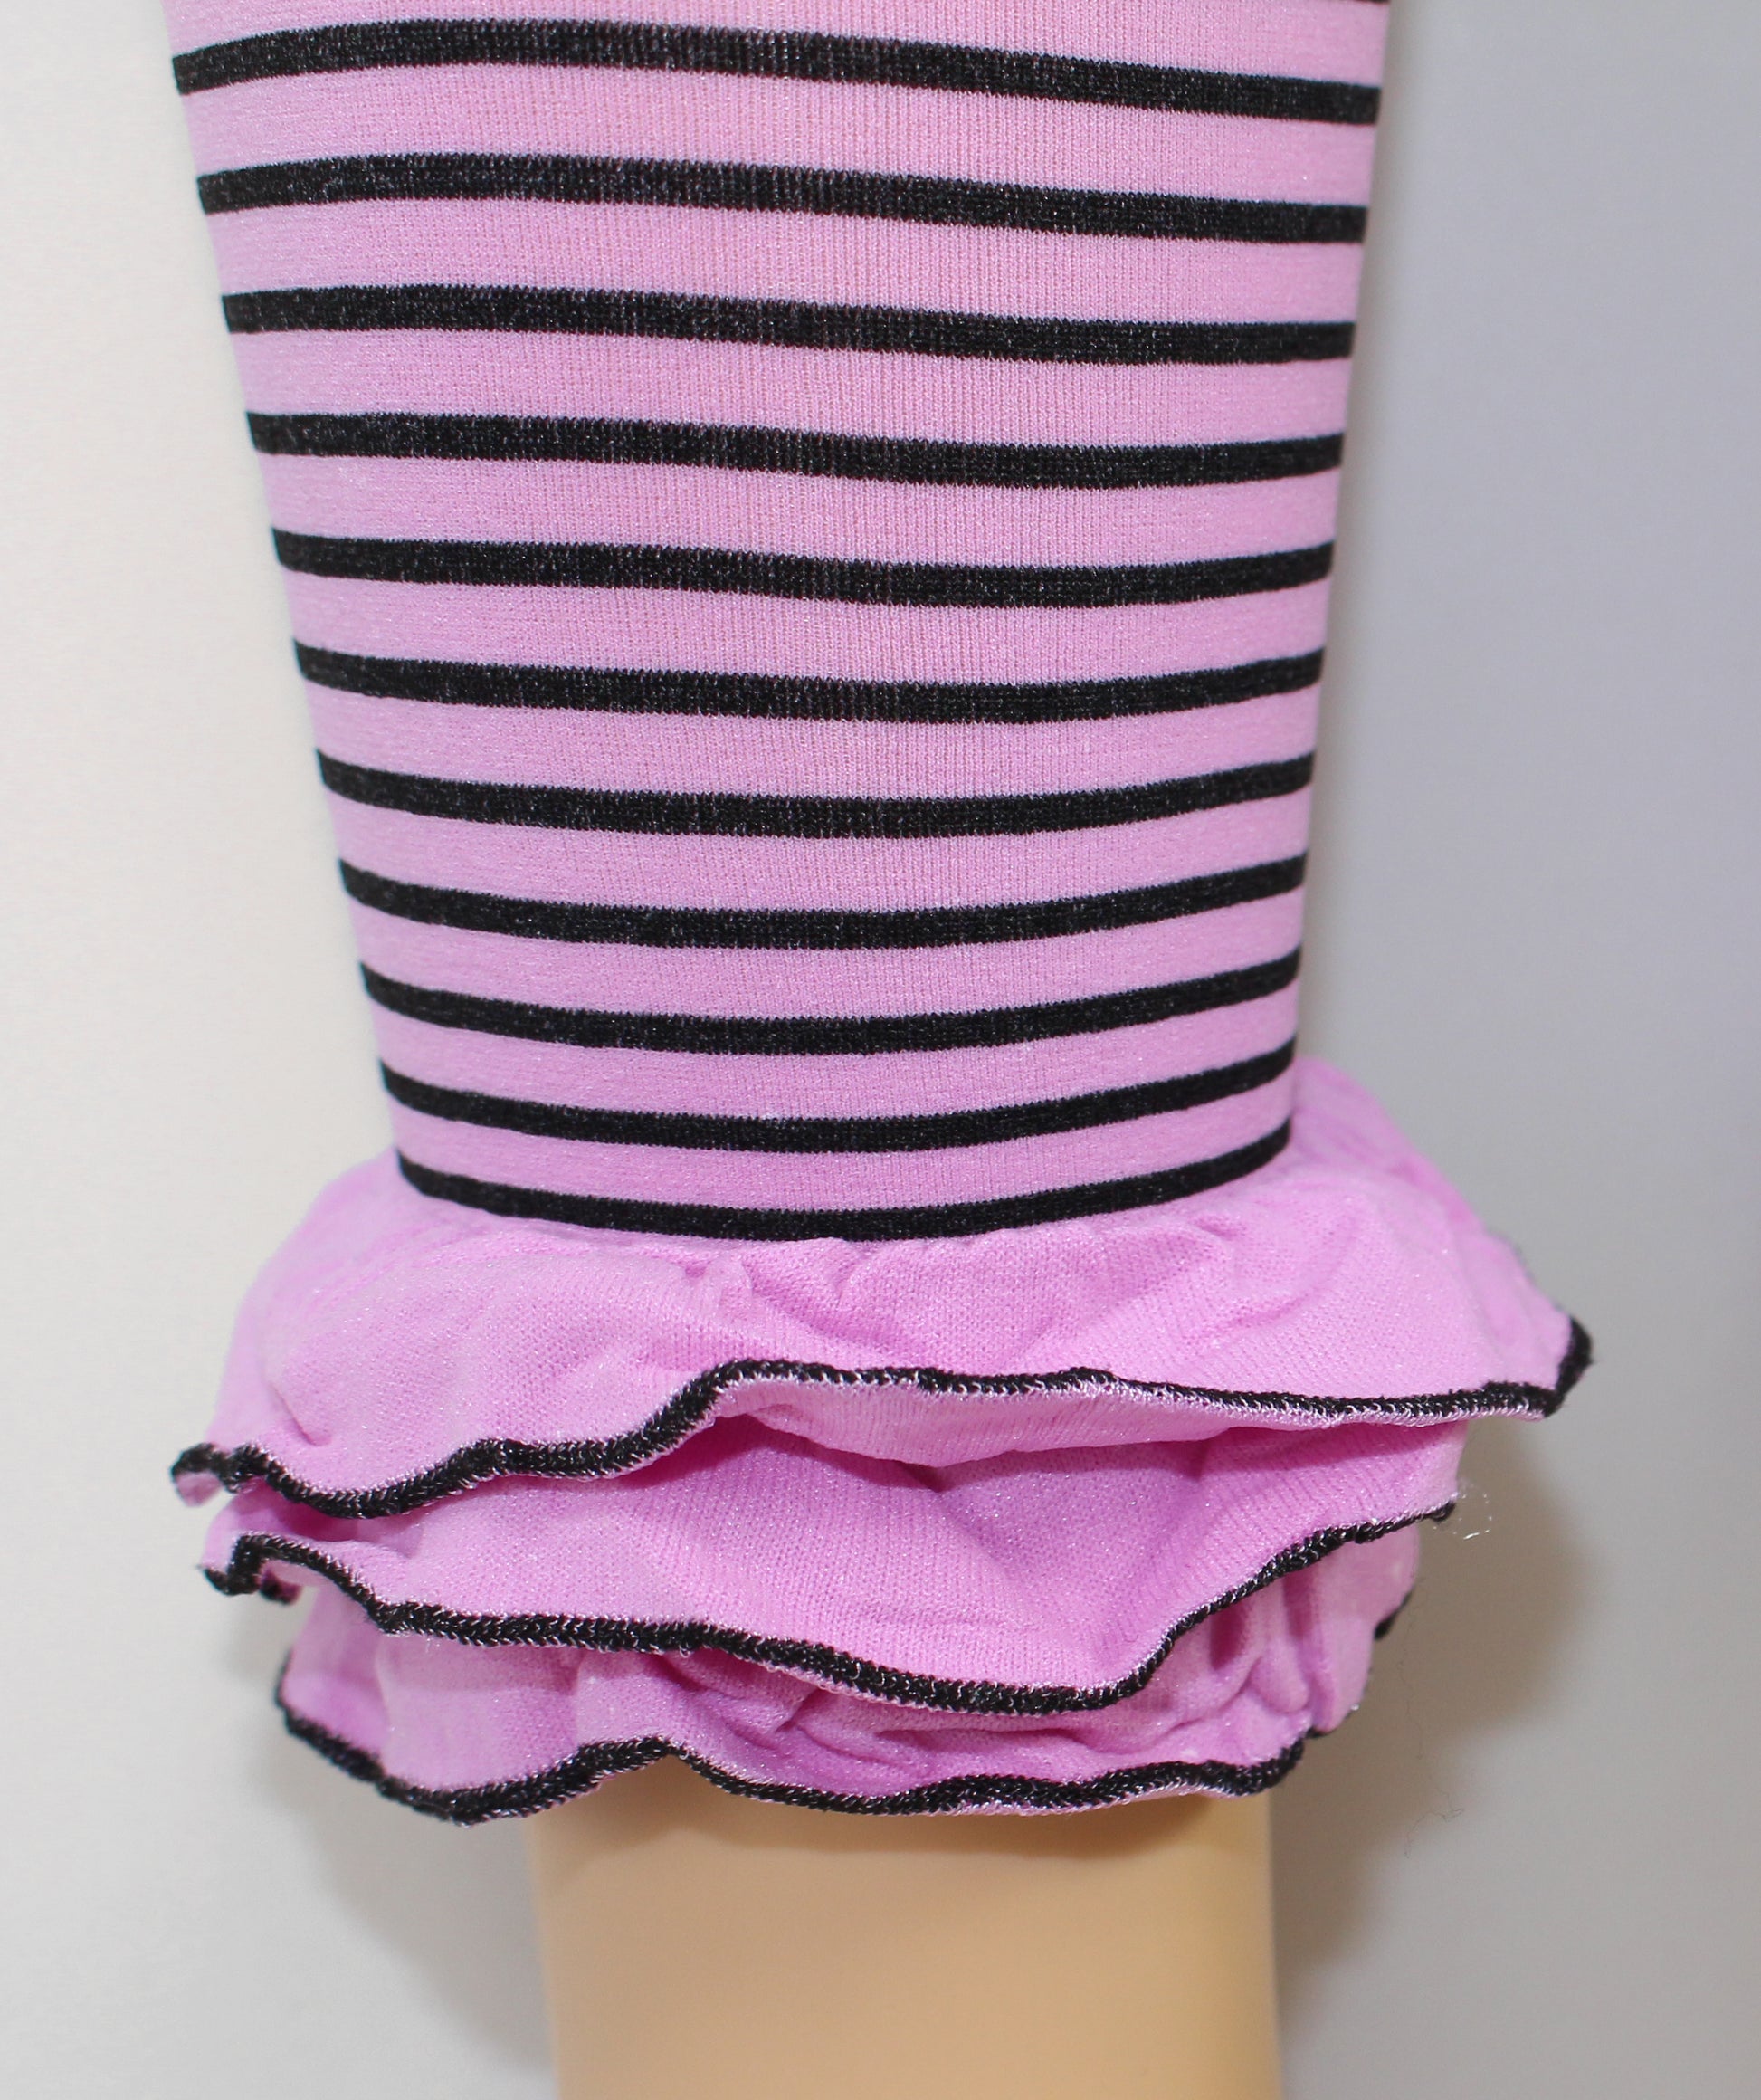 Omsa St. Tropez Pantacollant - Soft mauve pink opaque kid's footless tights with a black horizontal stripe pattern and frilly ruched cuff.